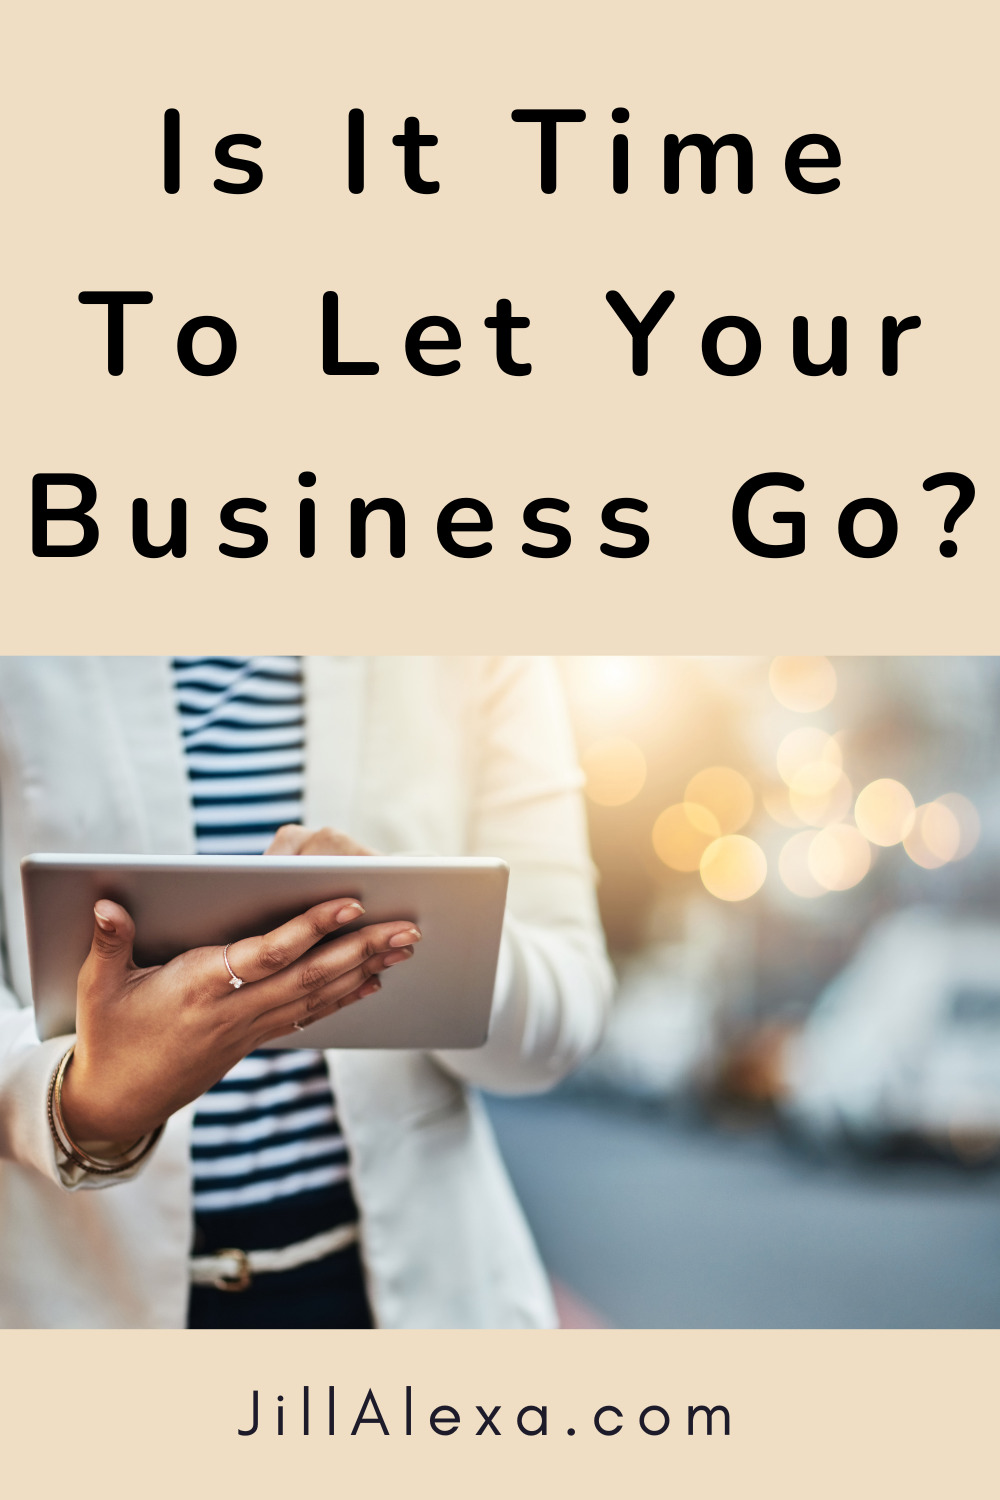 Is it time to let your business go  If you're lying awake at night with this question plaguing you, we get it. Here are 3 signs to look out for.